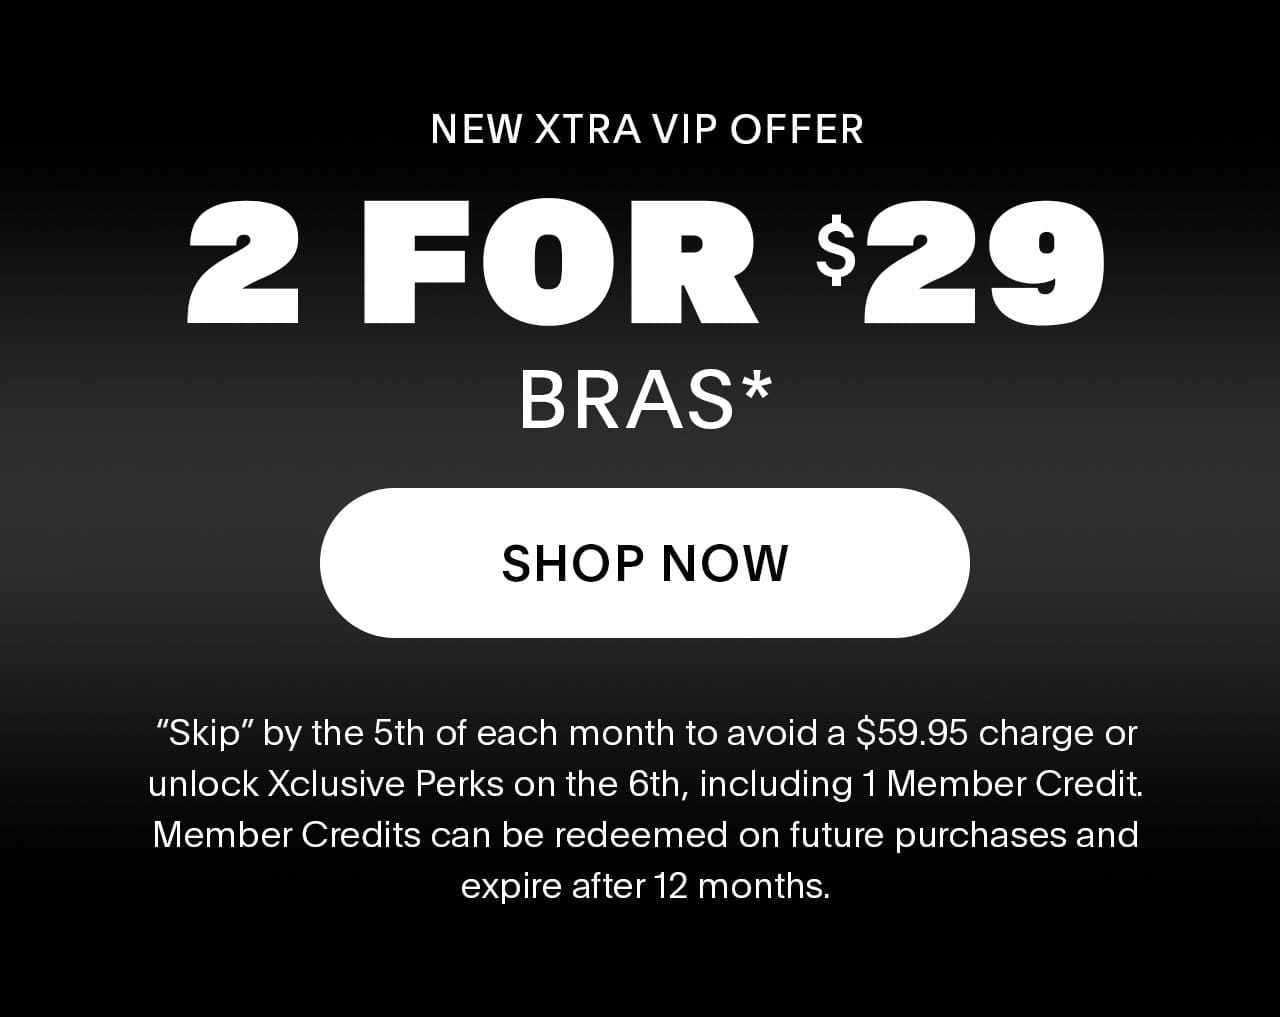 New Xtra VIP Offer 2 for \\$29 Bras* 